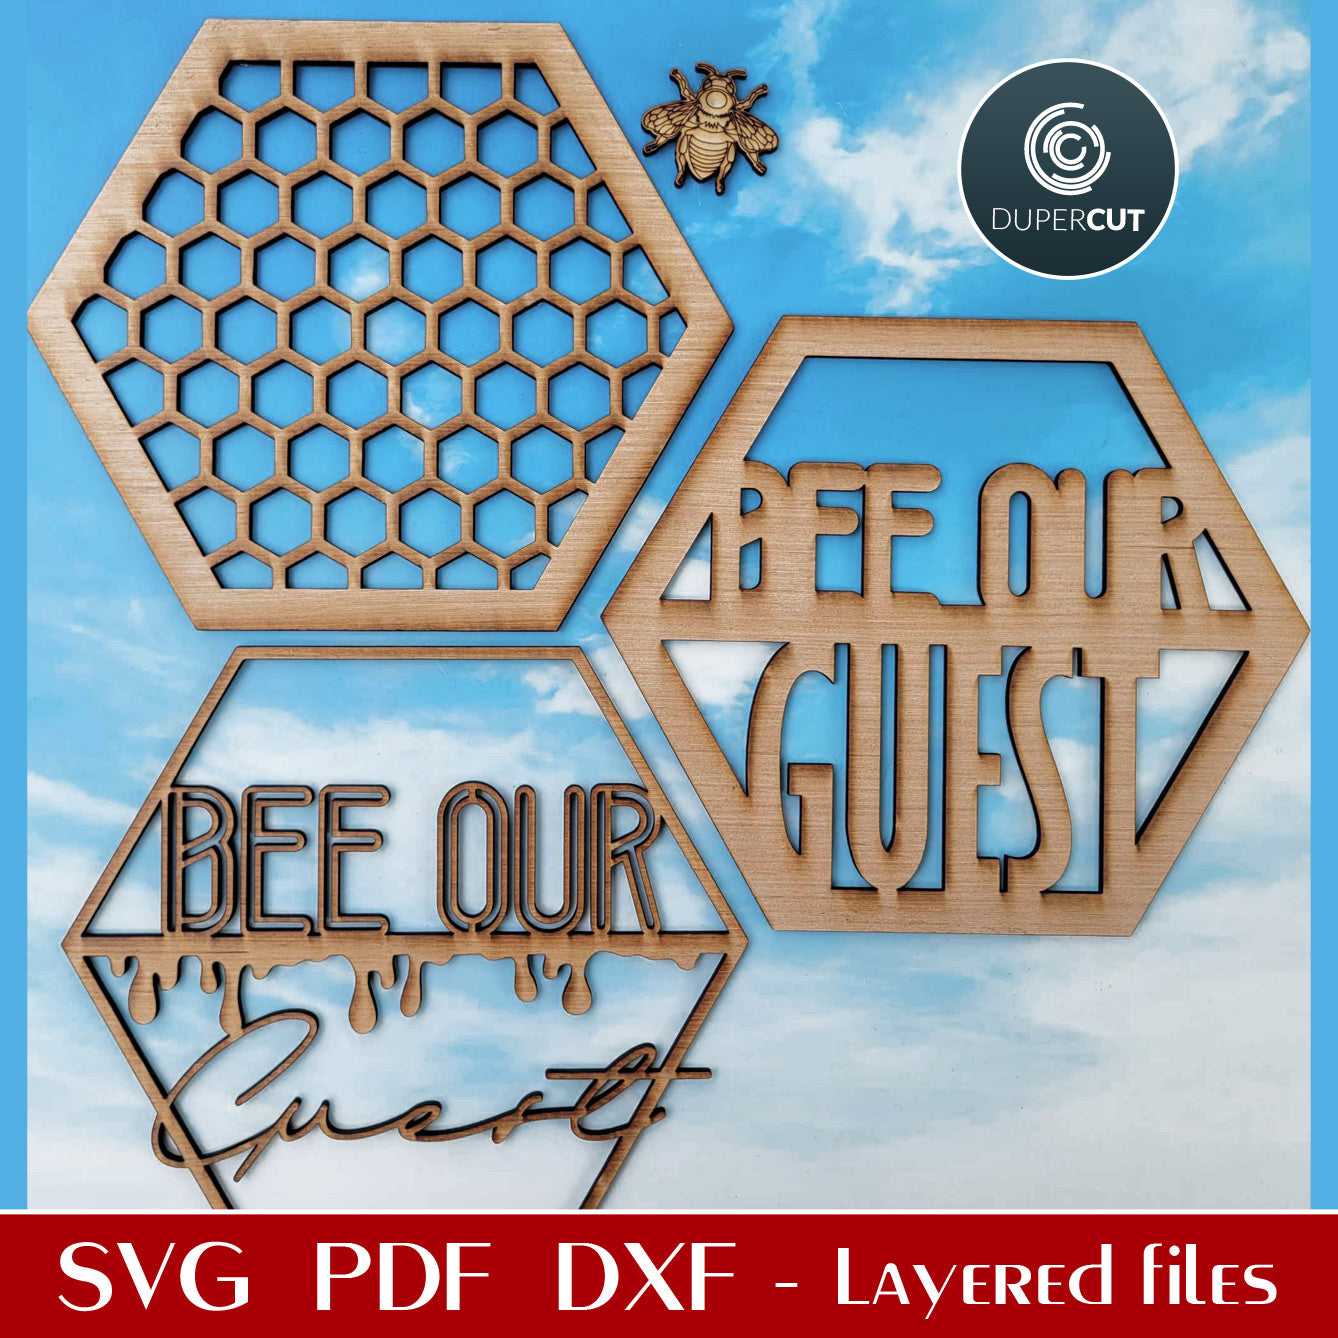 Bee Our Guest, bee hive welcome sign door hanger - SVG DXF vector files for laser Glowforge, Xtool, Cricut, CNC plasma machines by www.DuperCut.com